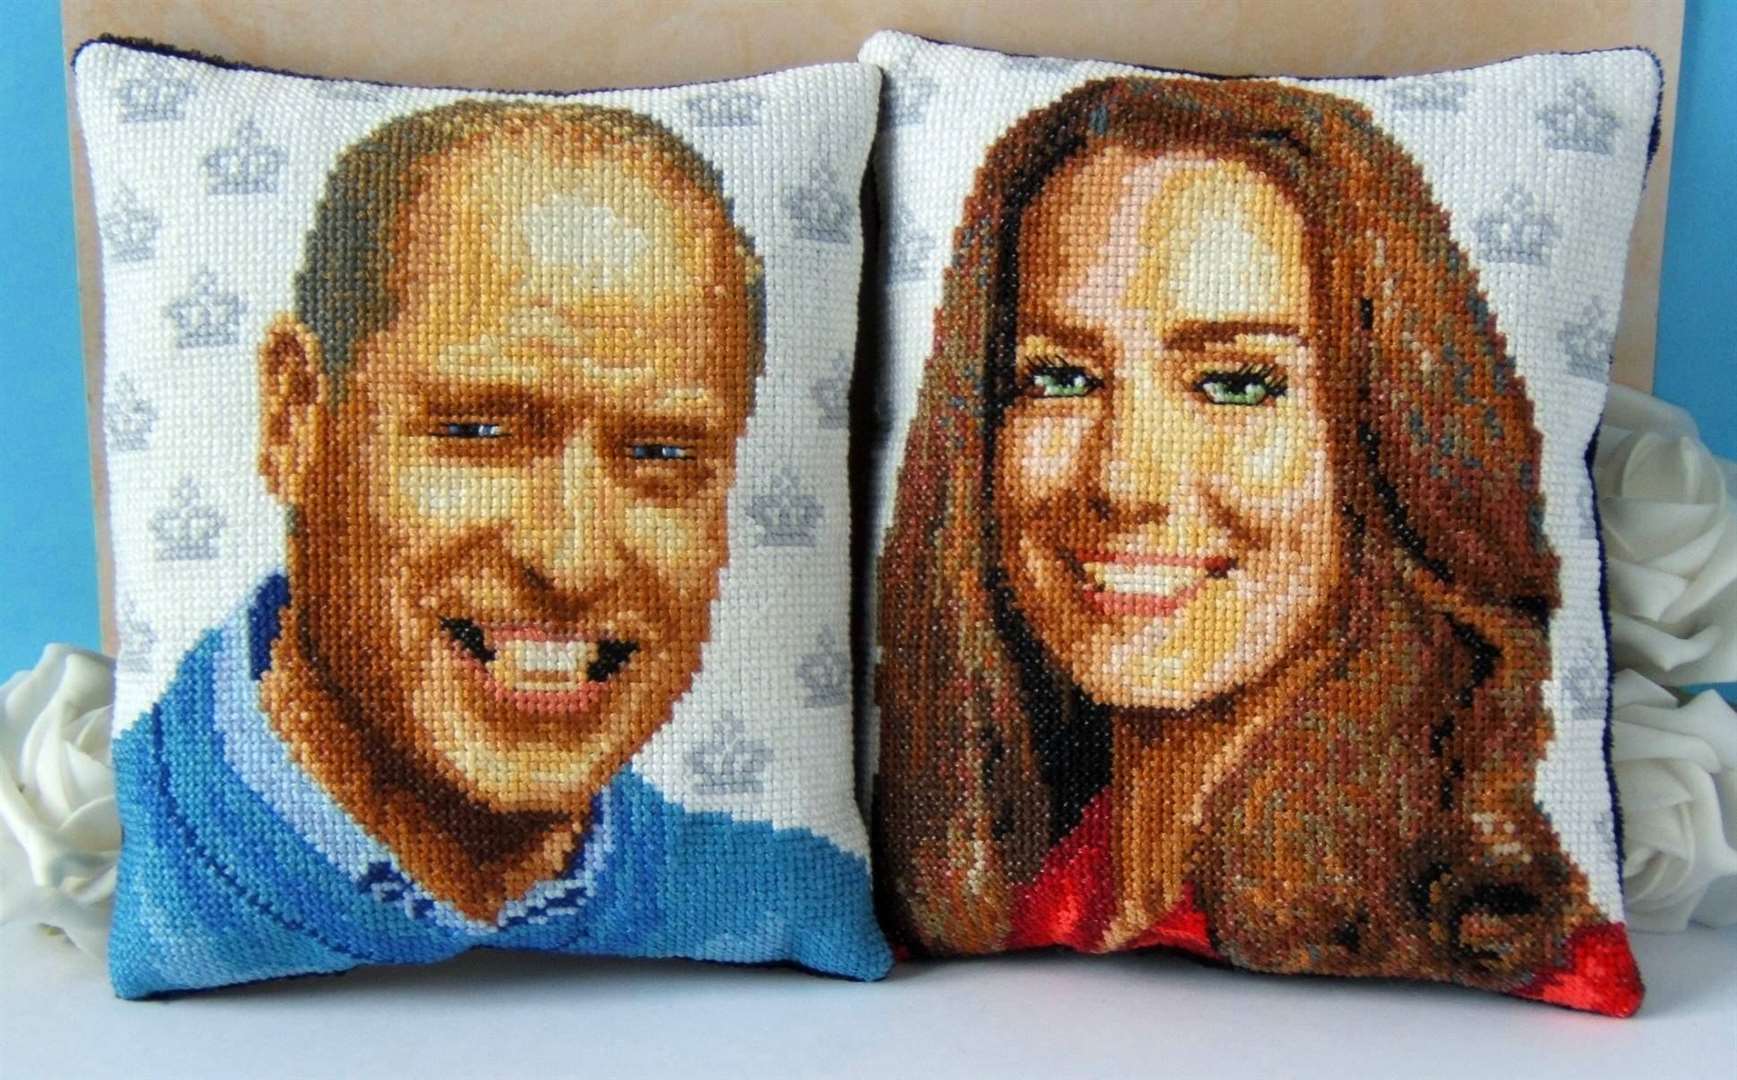 She also makes portraits of William and Kate